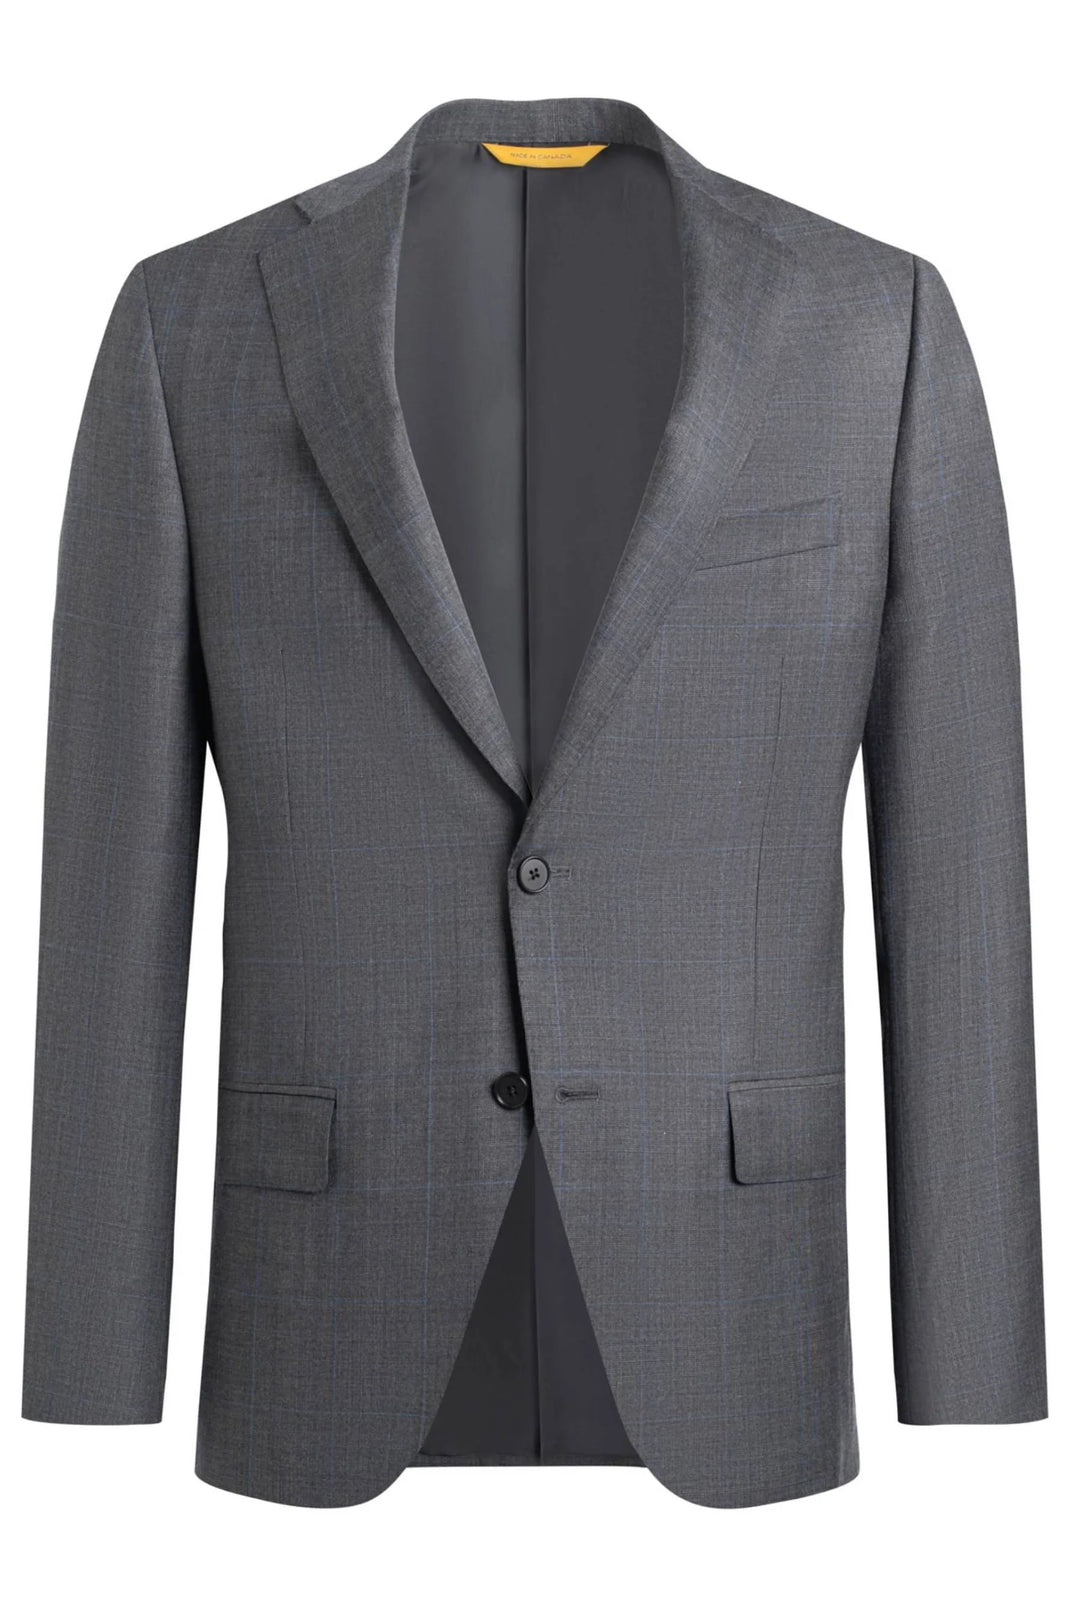 Charcoal Infinity Suit